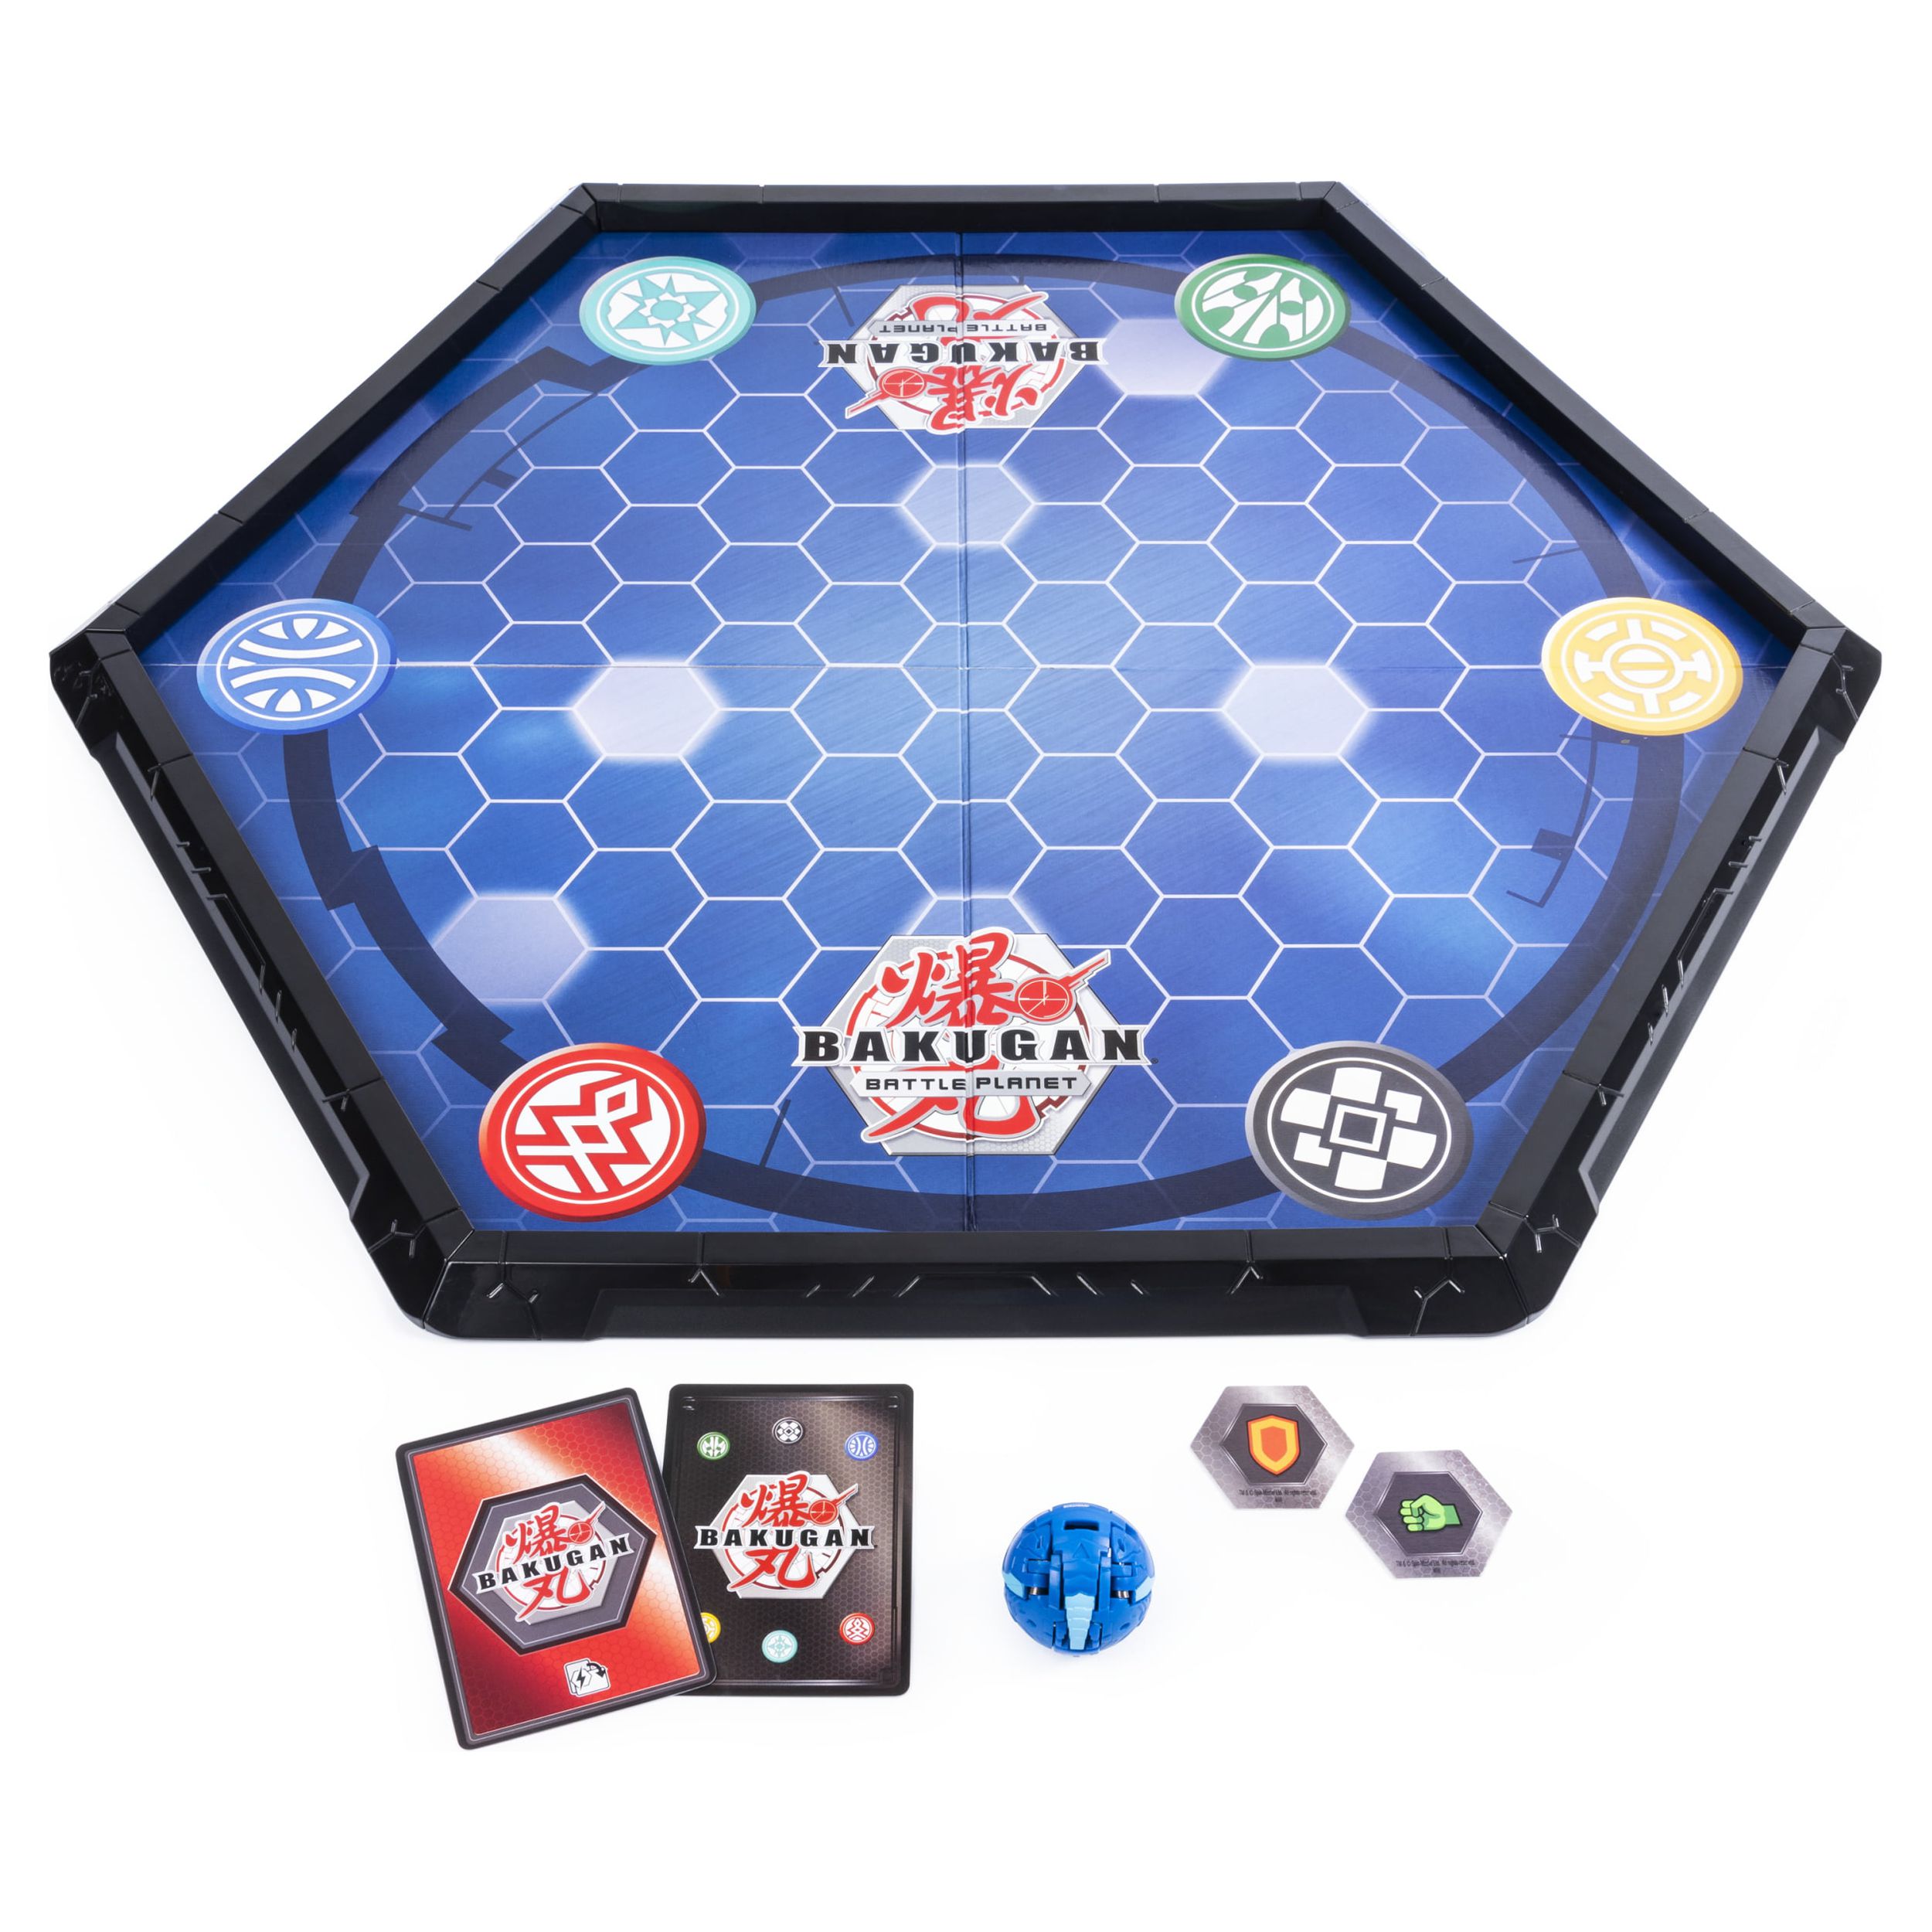 Bakugan Battle Arena, Game Board for Bakugan Collectibles, for Ages 6 and Up (Edition May Vary) - image 2 of 8